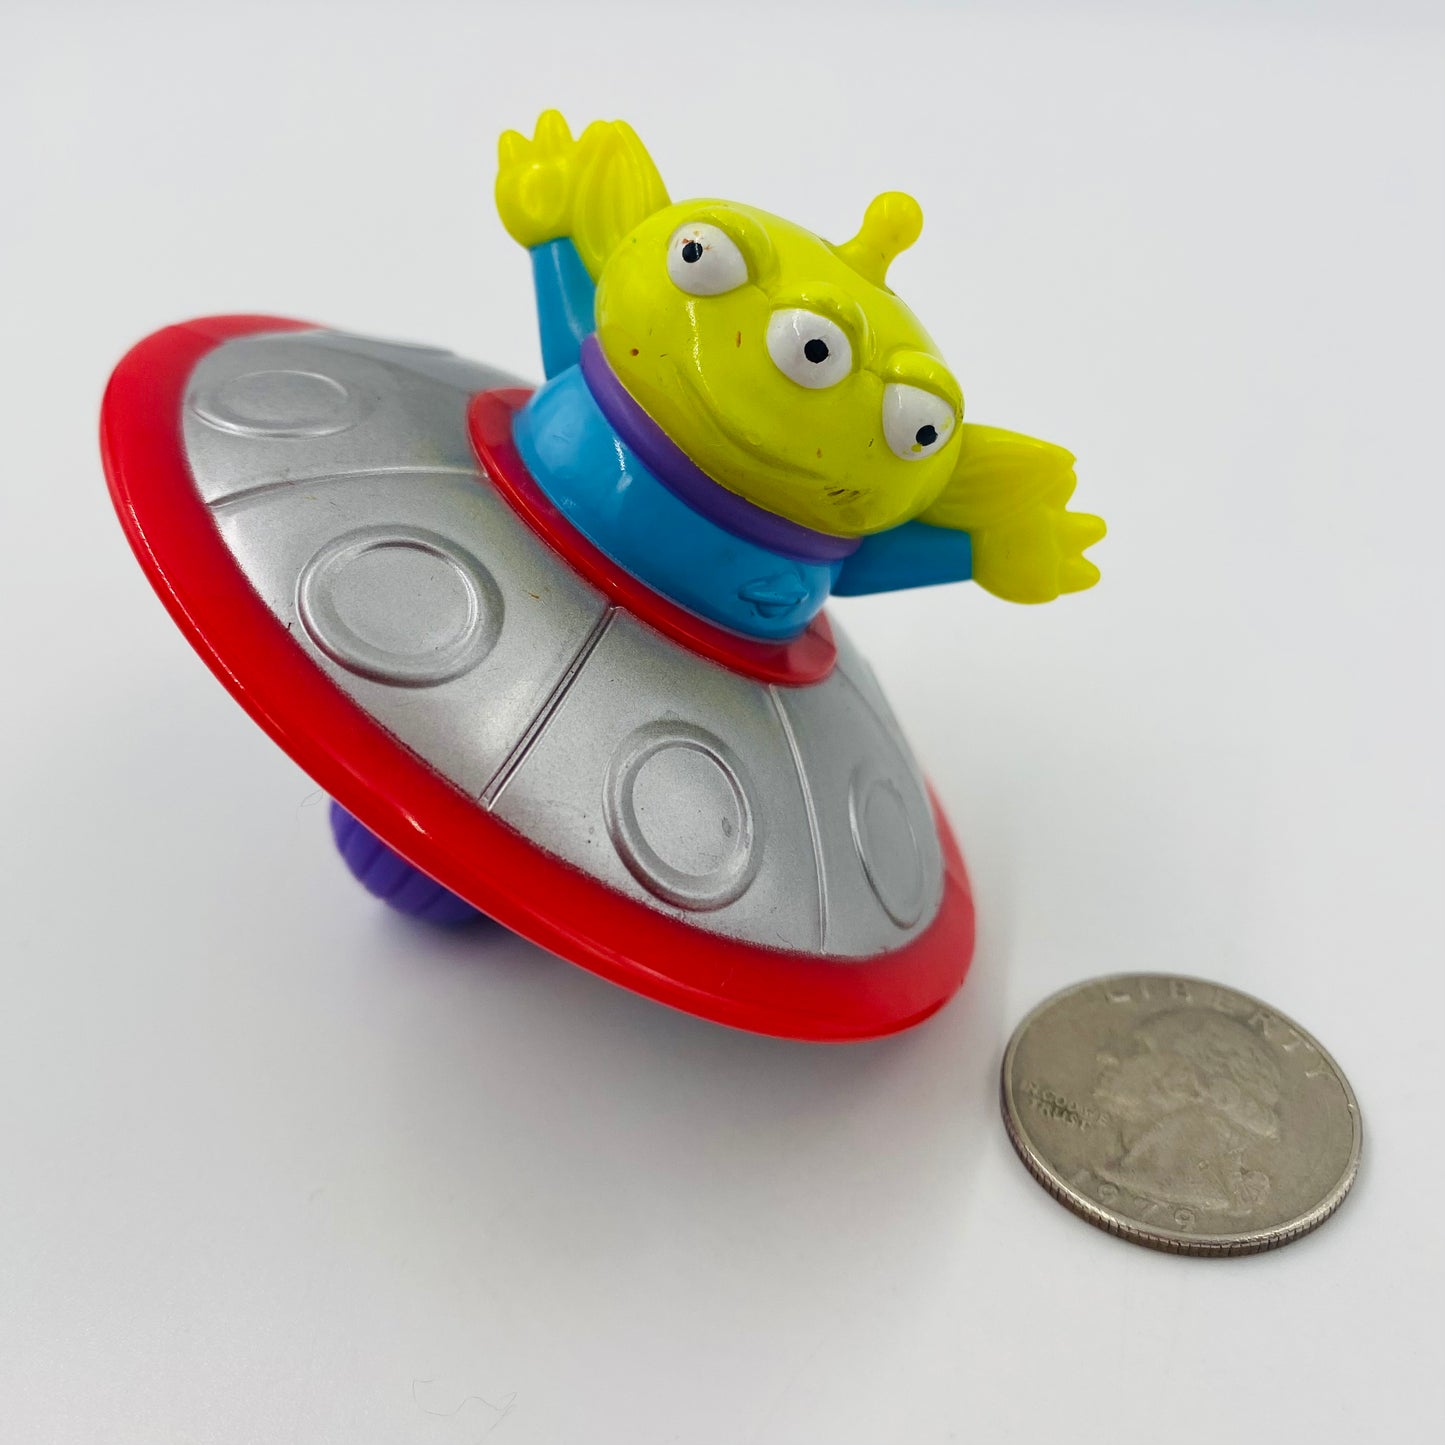 Toy Story 2 Little Green Alien spinning top McDonald's Happy Meal toy (1999) loose